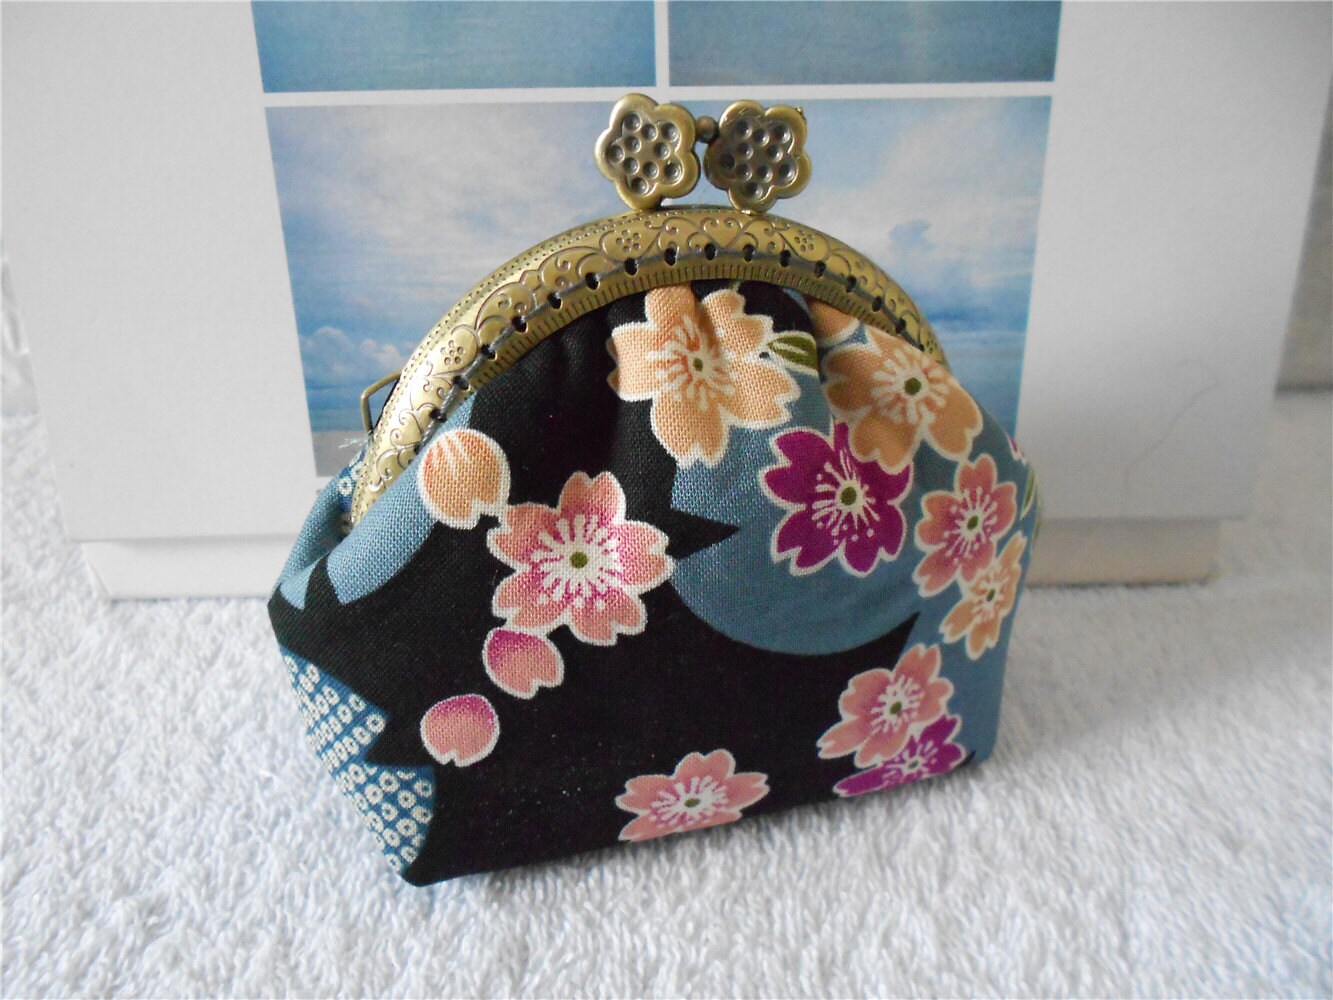 Japanese Cotton Change Purse Small Clutch Wallet - Etsy